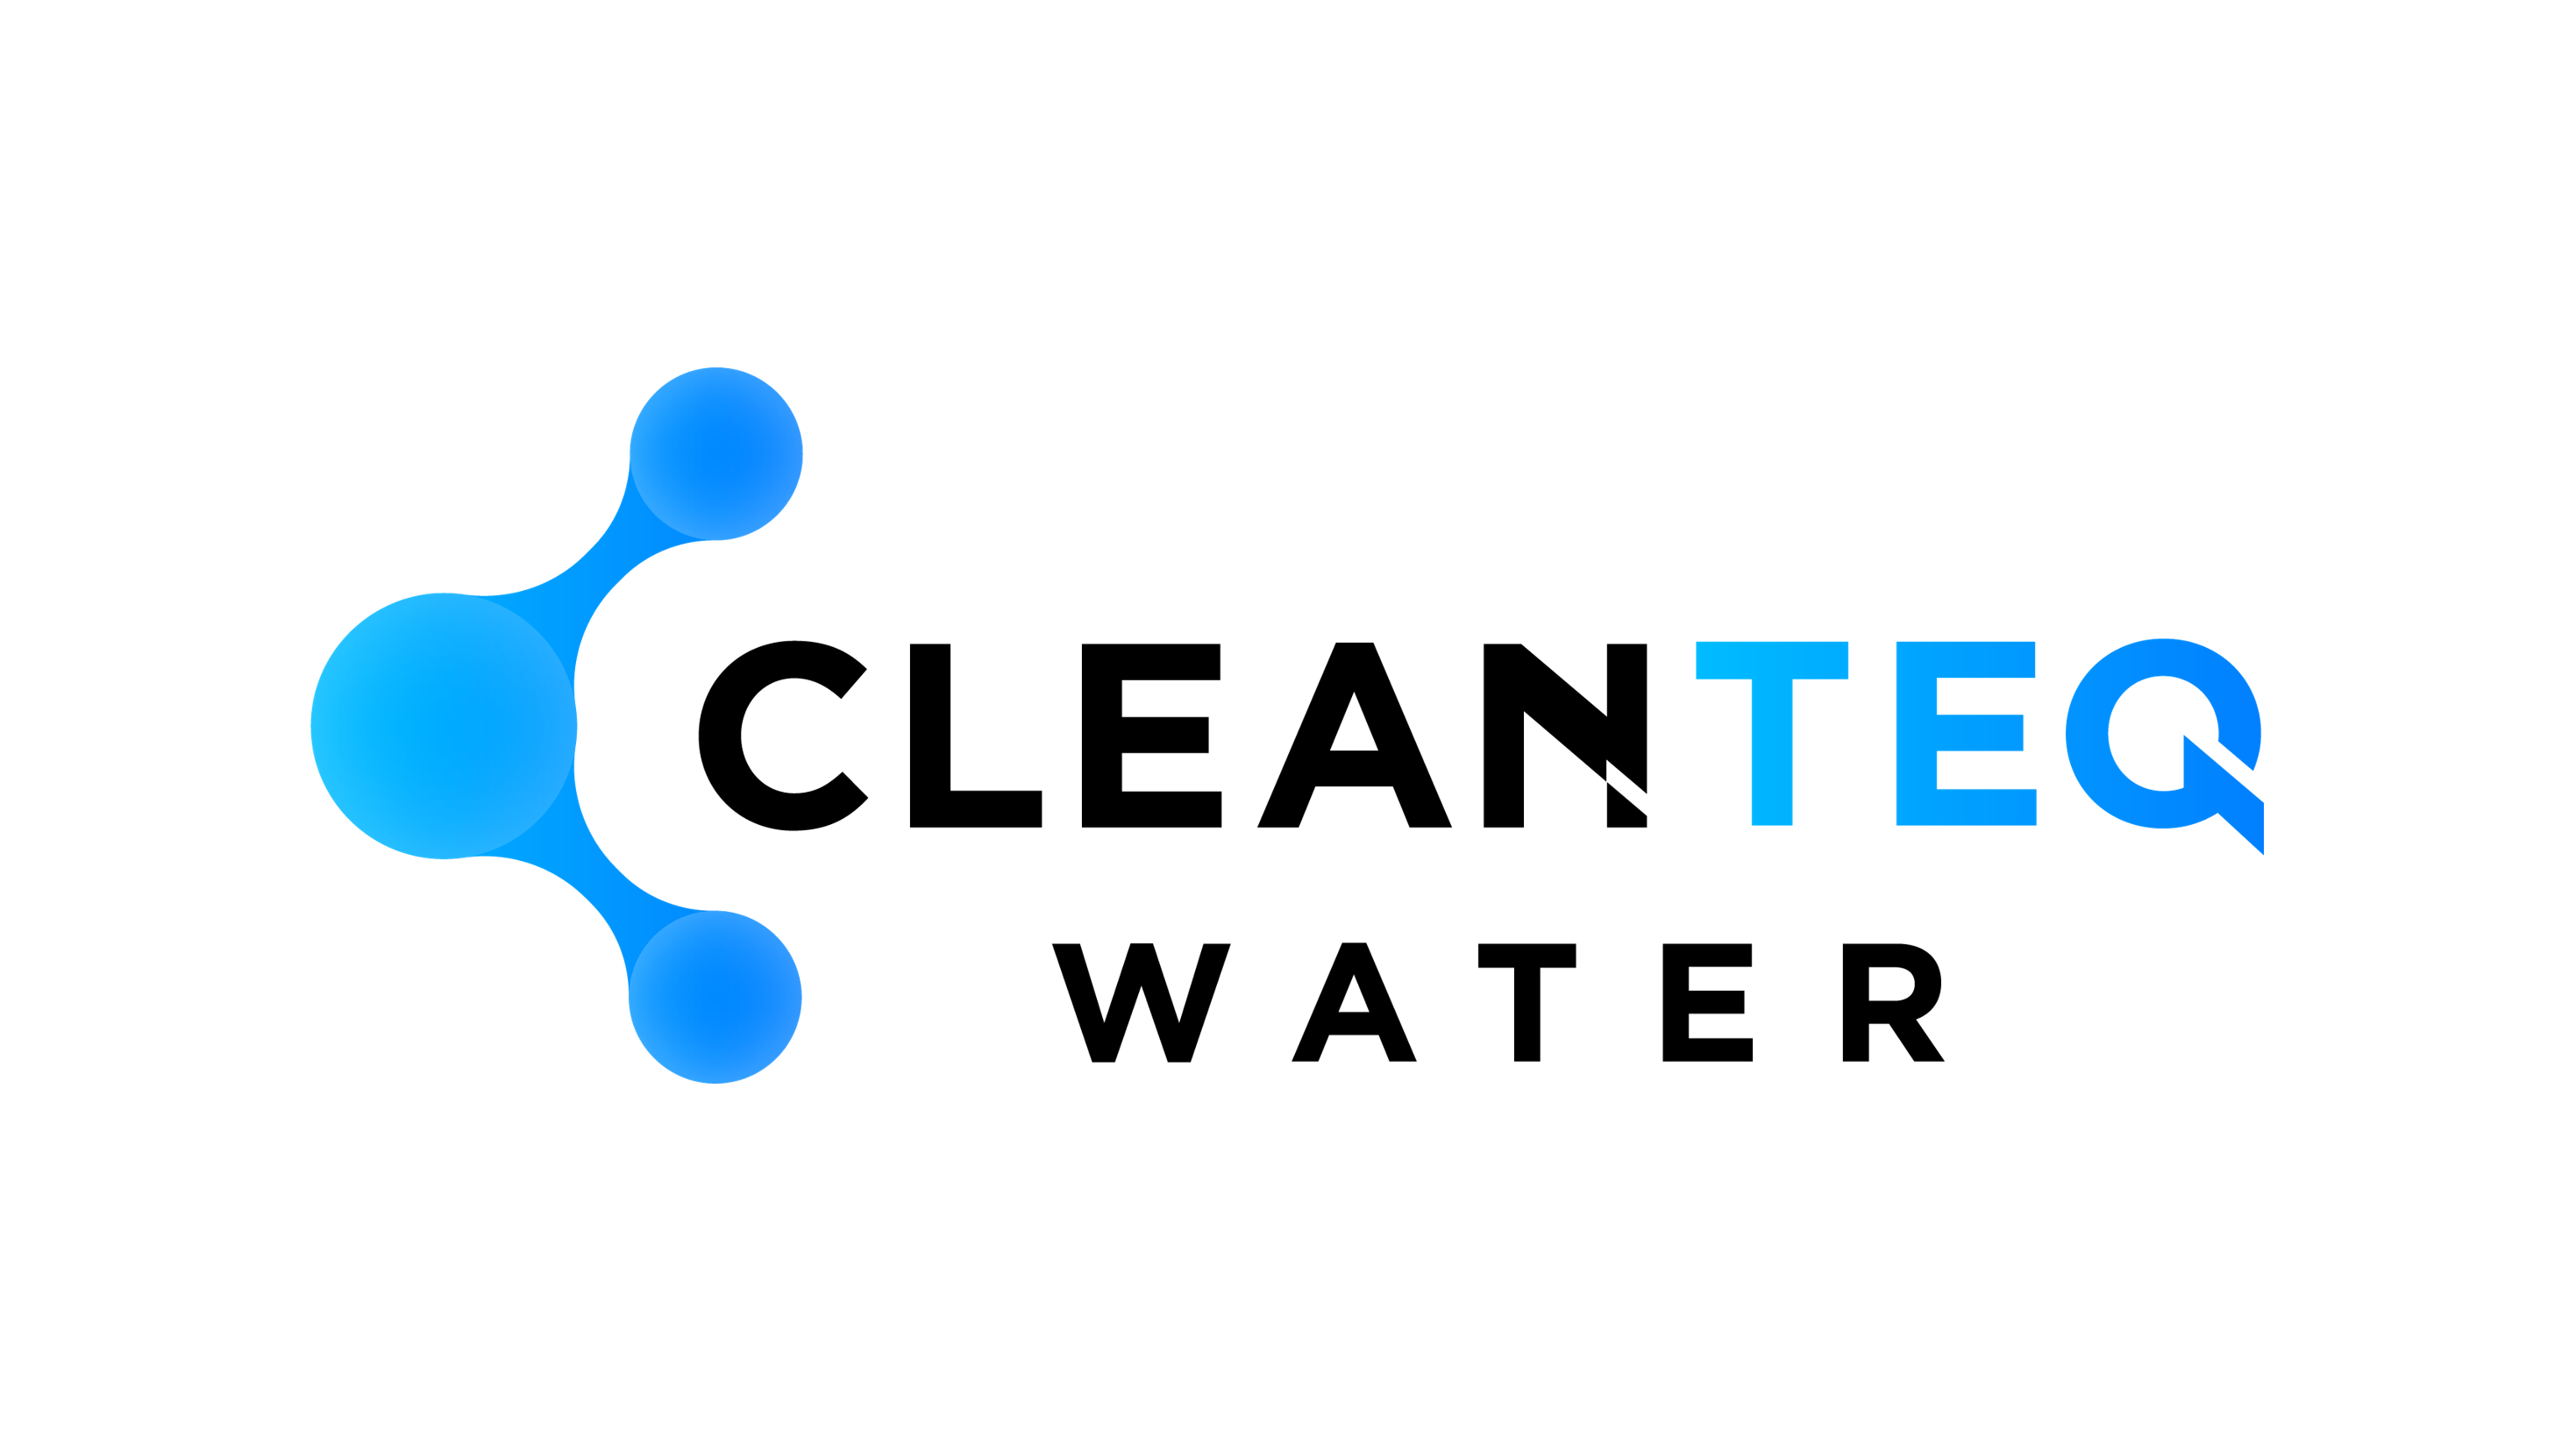 Clean TeQ Water Launches New Logo